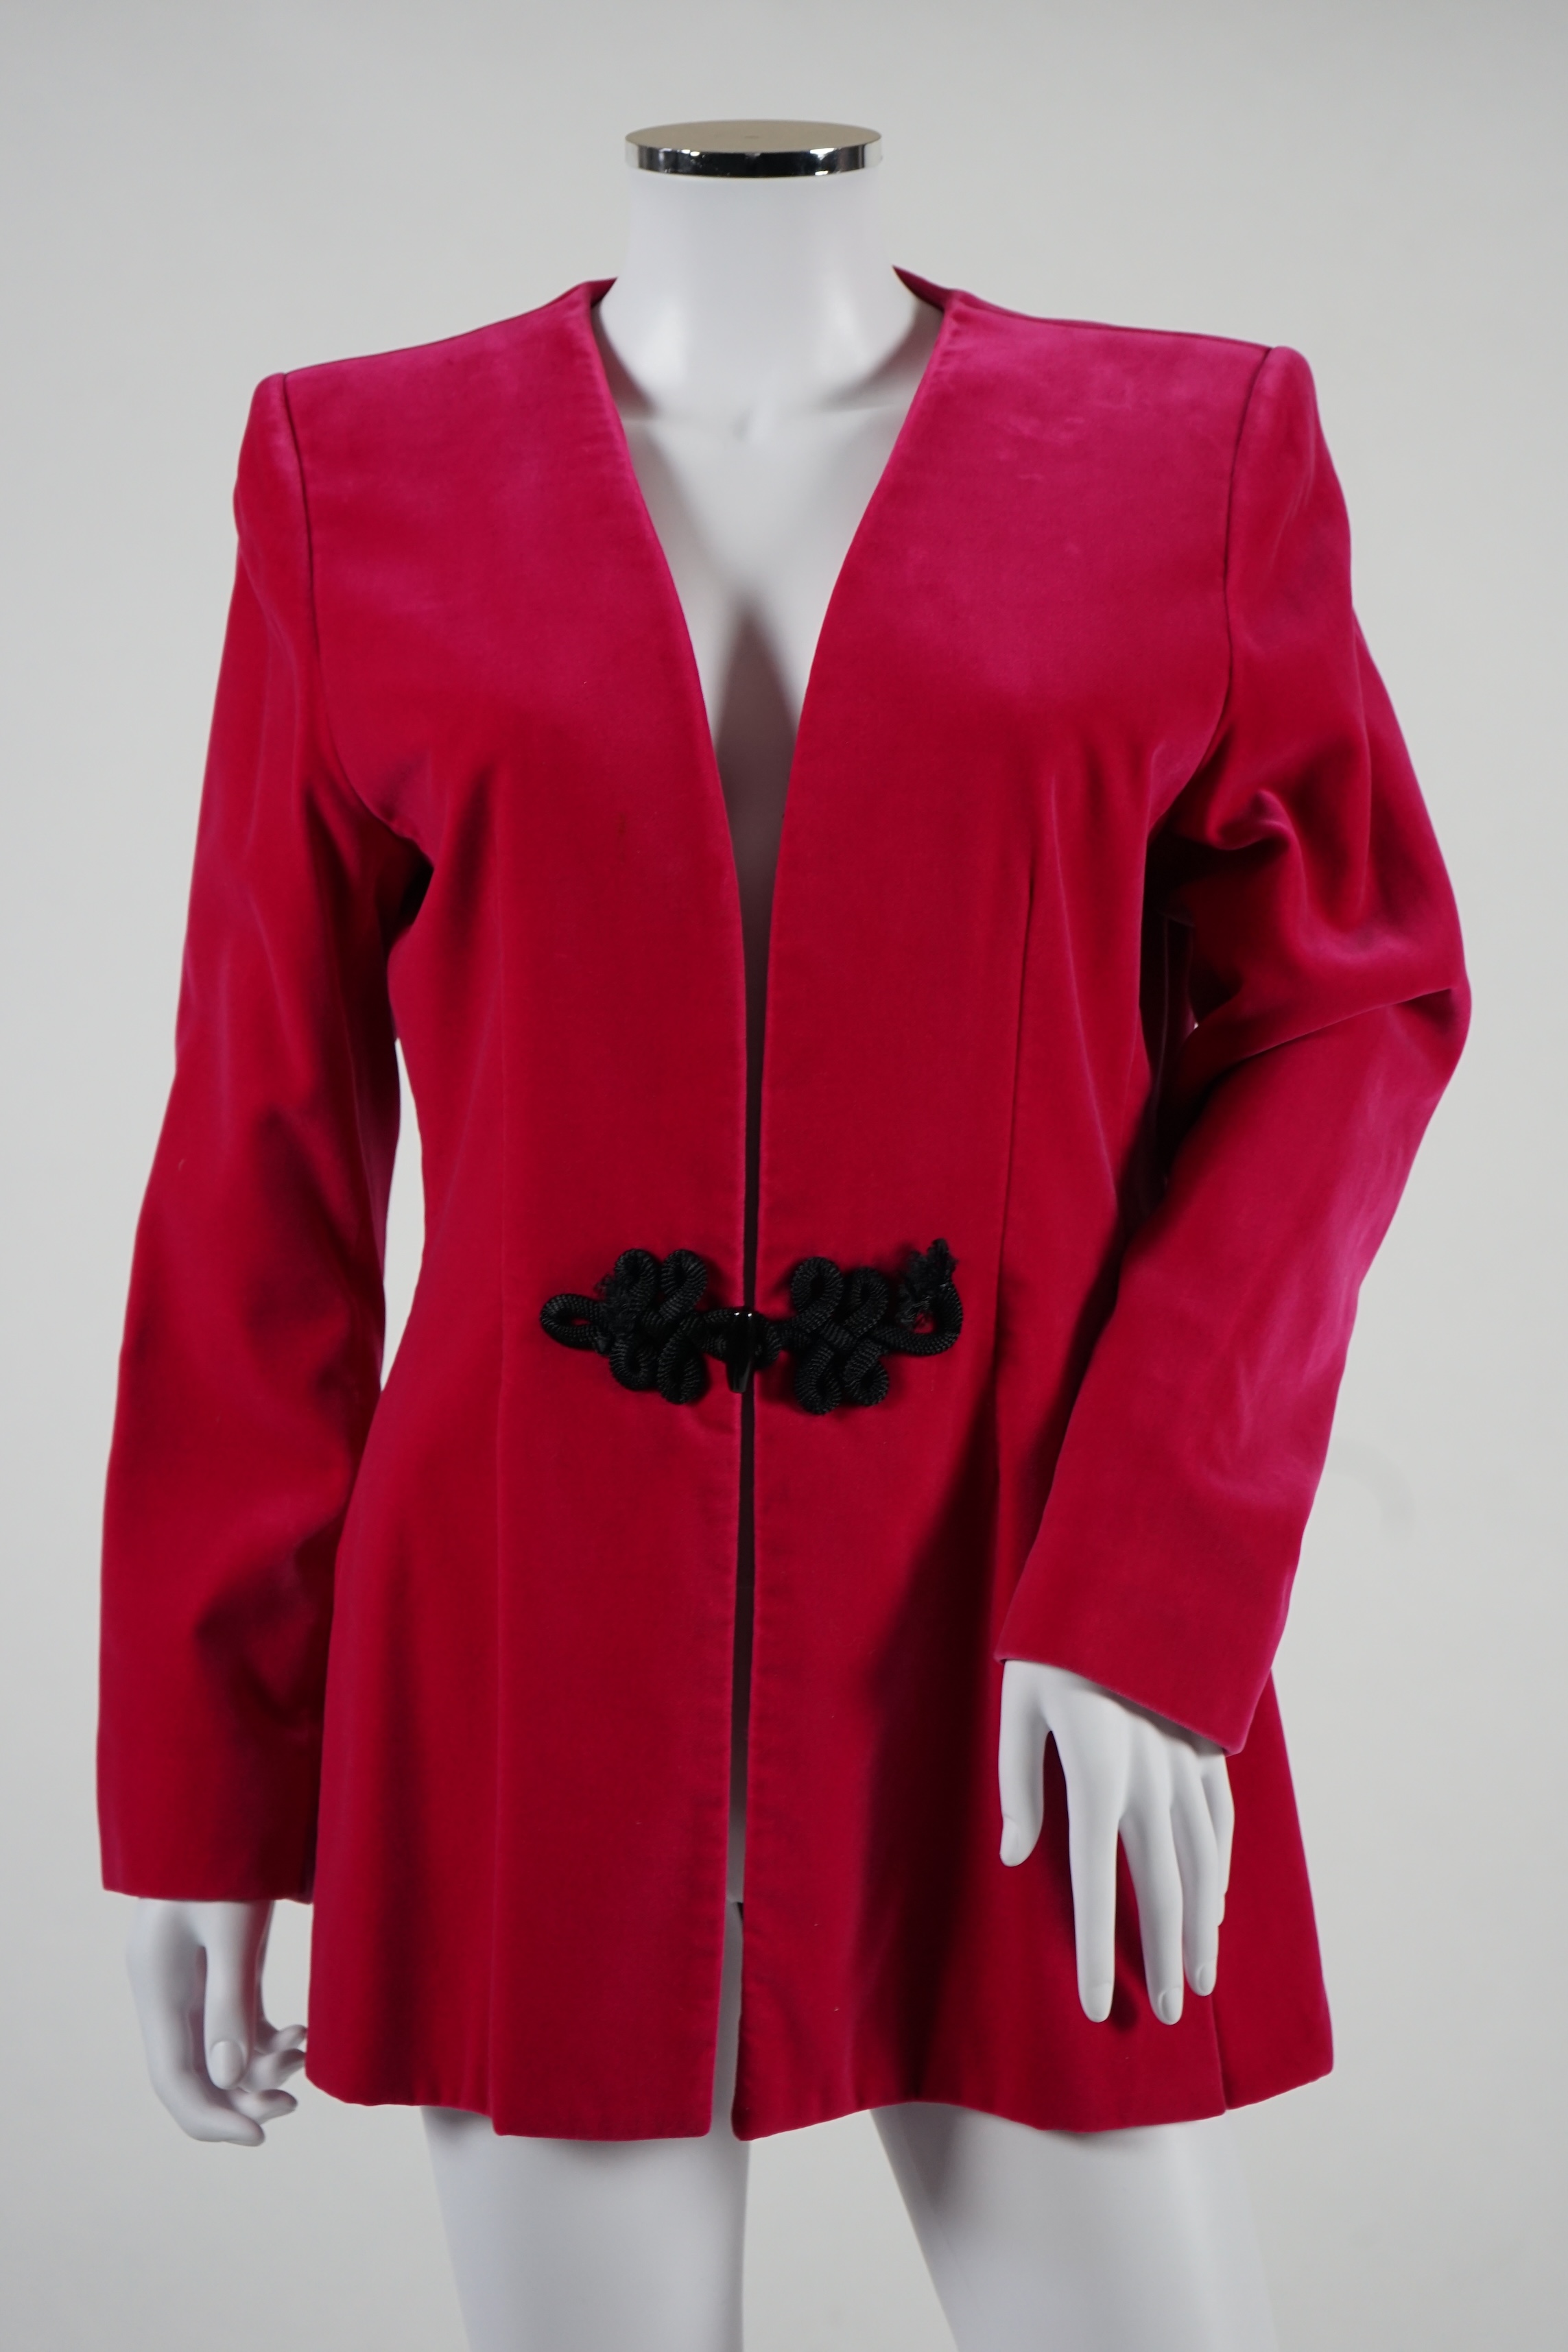 Two vintage Yves Saint Laurent variation lady's jackets, F 40 (UK 12). Proceeds to Happy Paws Puppy Rescue